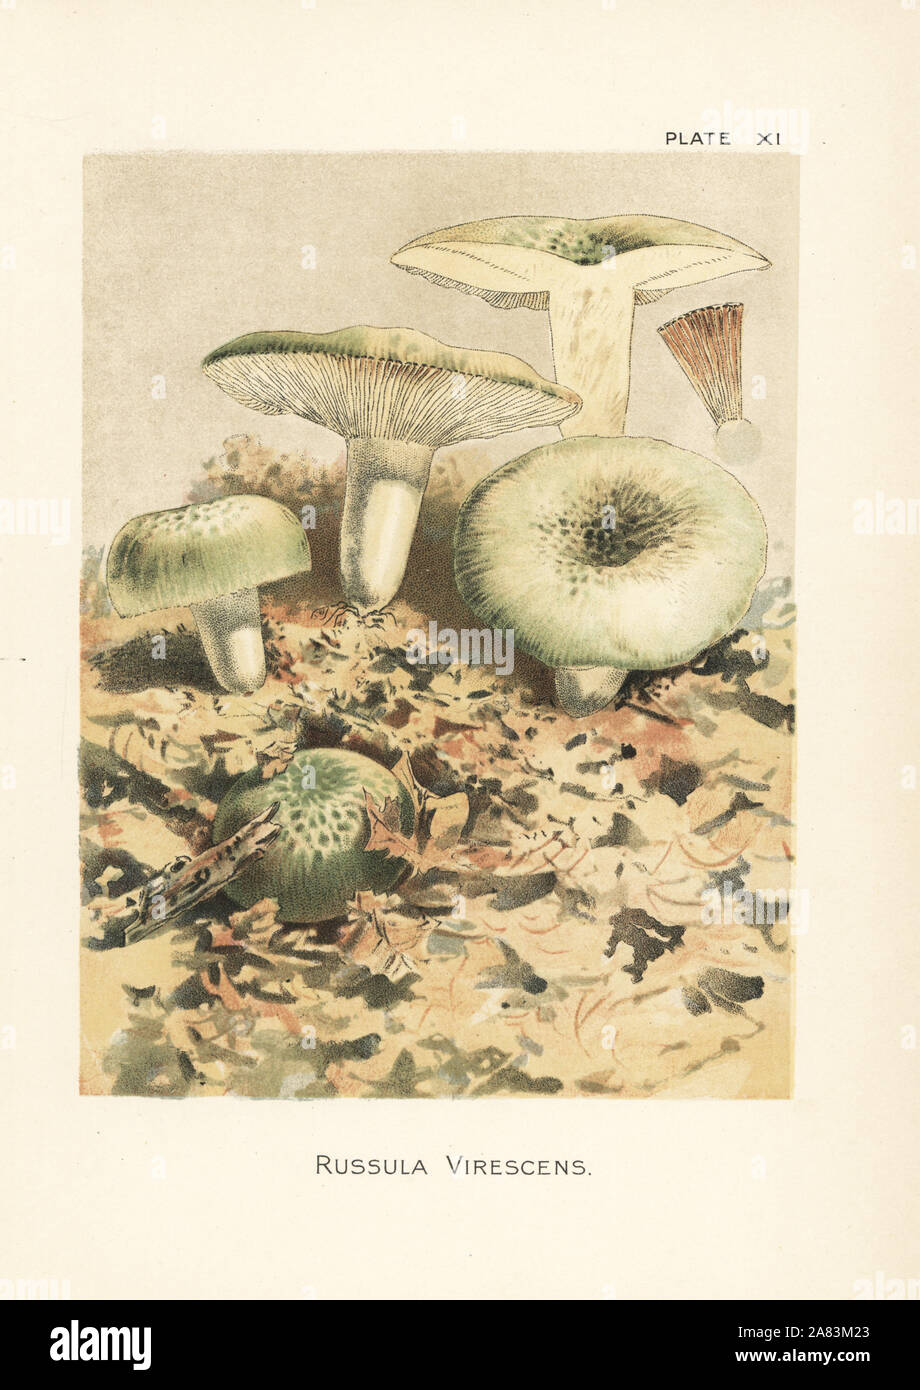 Green brittlegill mushroom, Russula virescens. Chromolithograph after a botanical illustration by William Hamilton Gibson from his book Our Edible Toadstools and Mushrooms, Harper, New York, 1895. Stock Photo